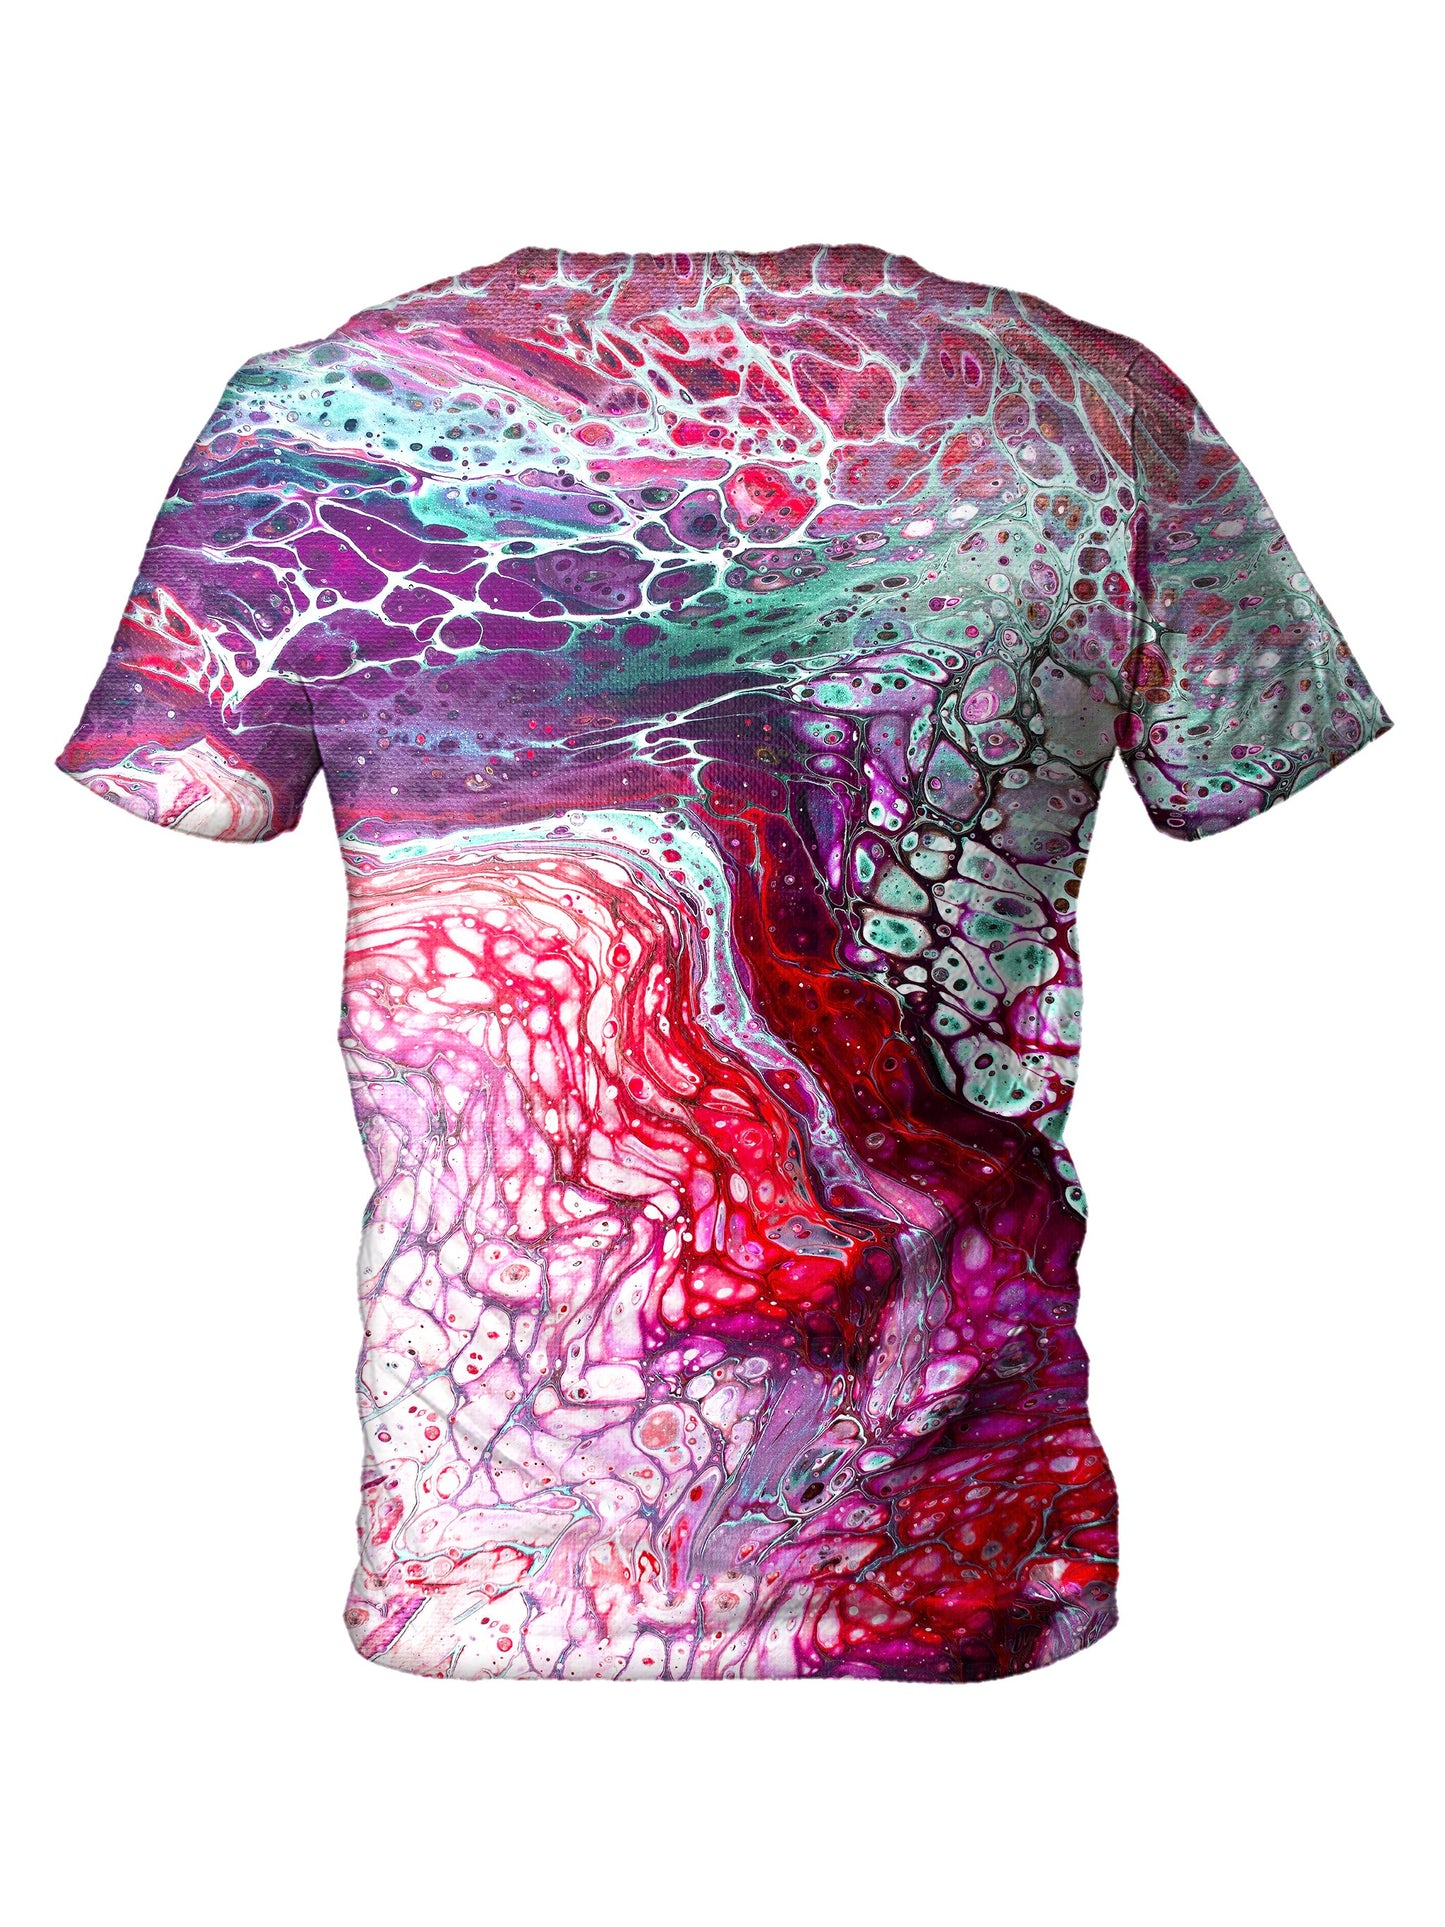 Back view of all over print psychedelic marble painting t shirt by Gratefully Dyed Apparel. 